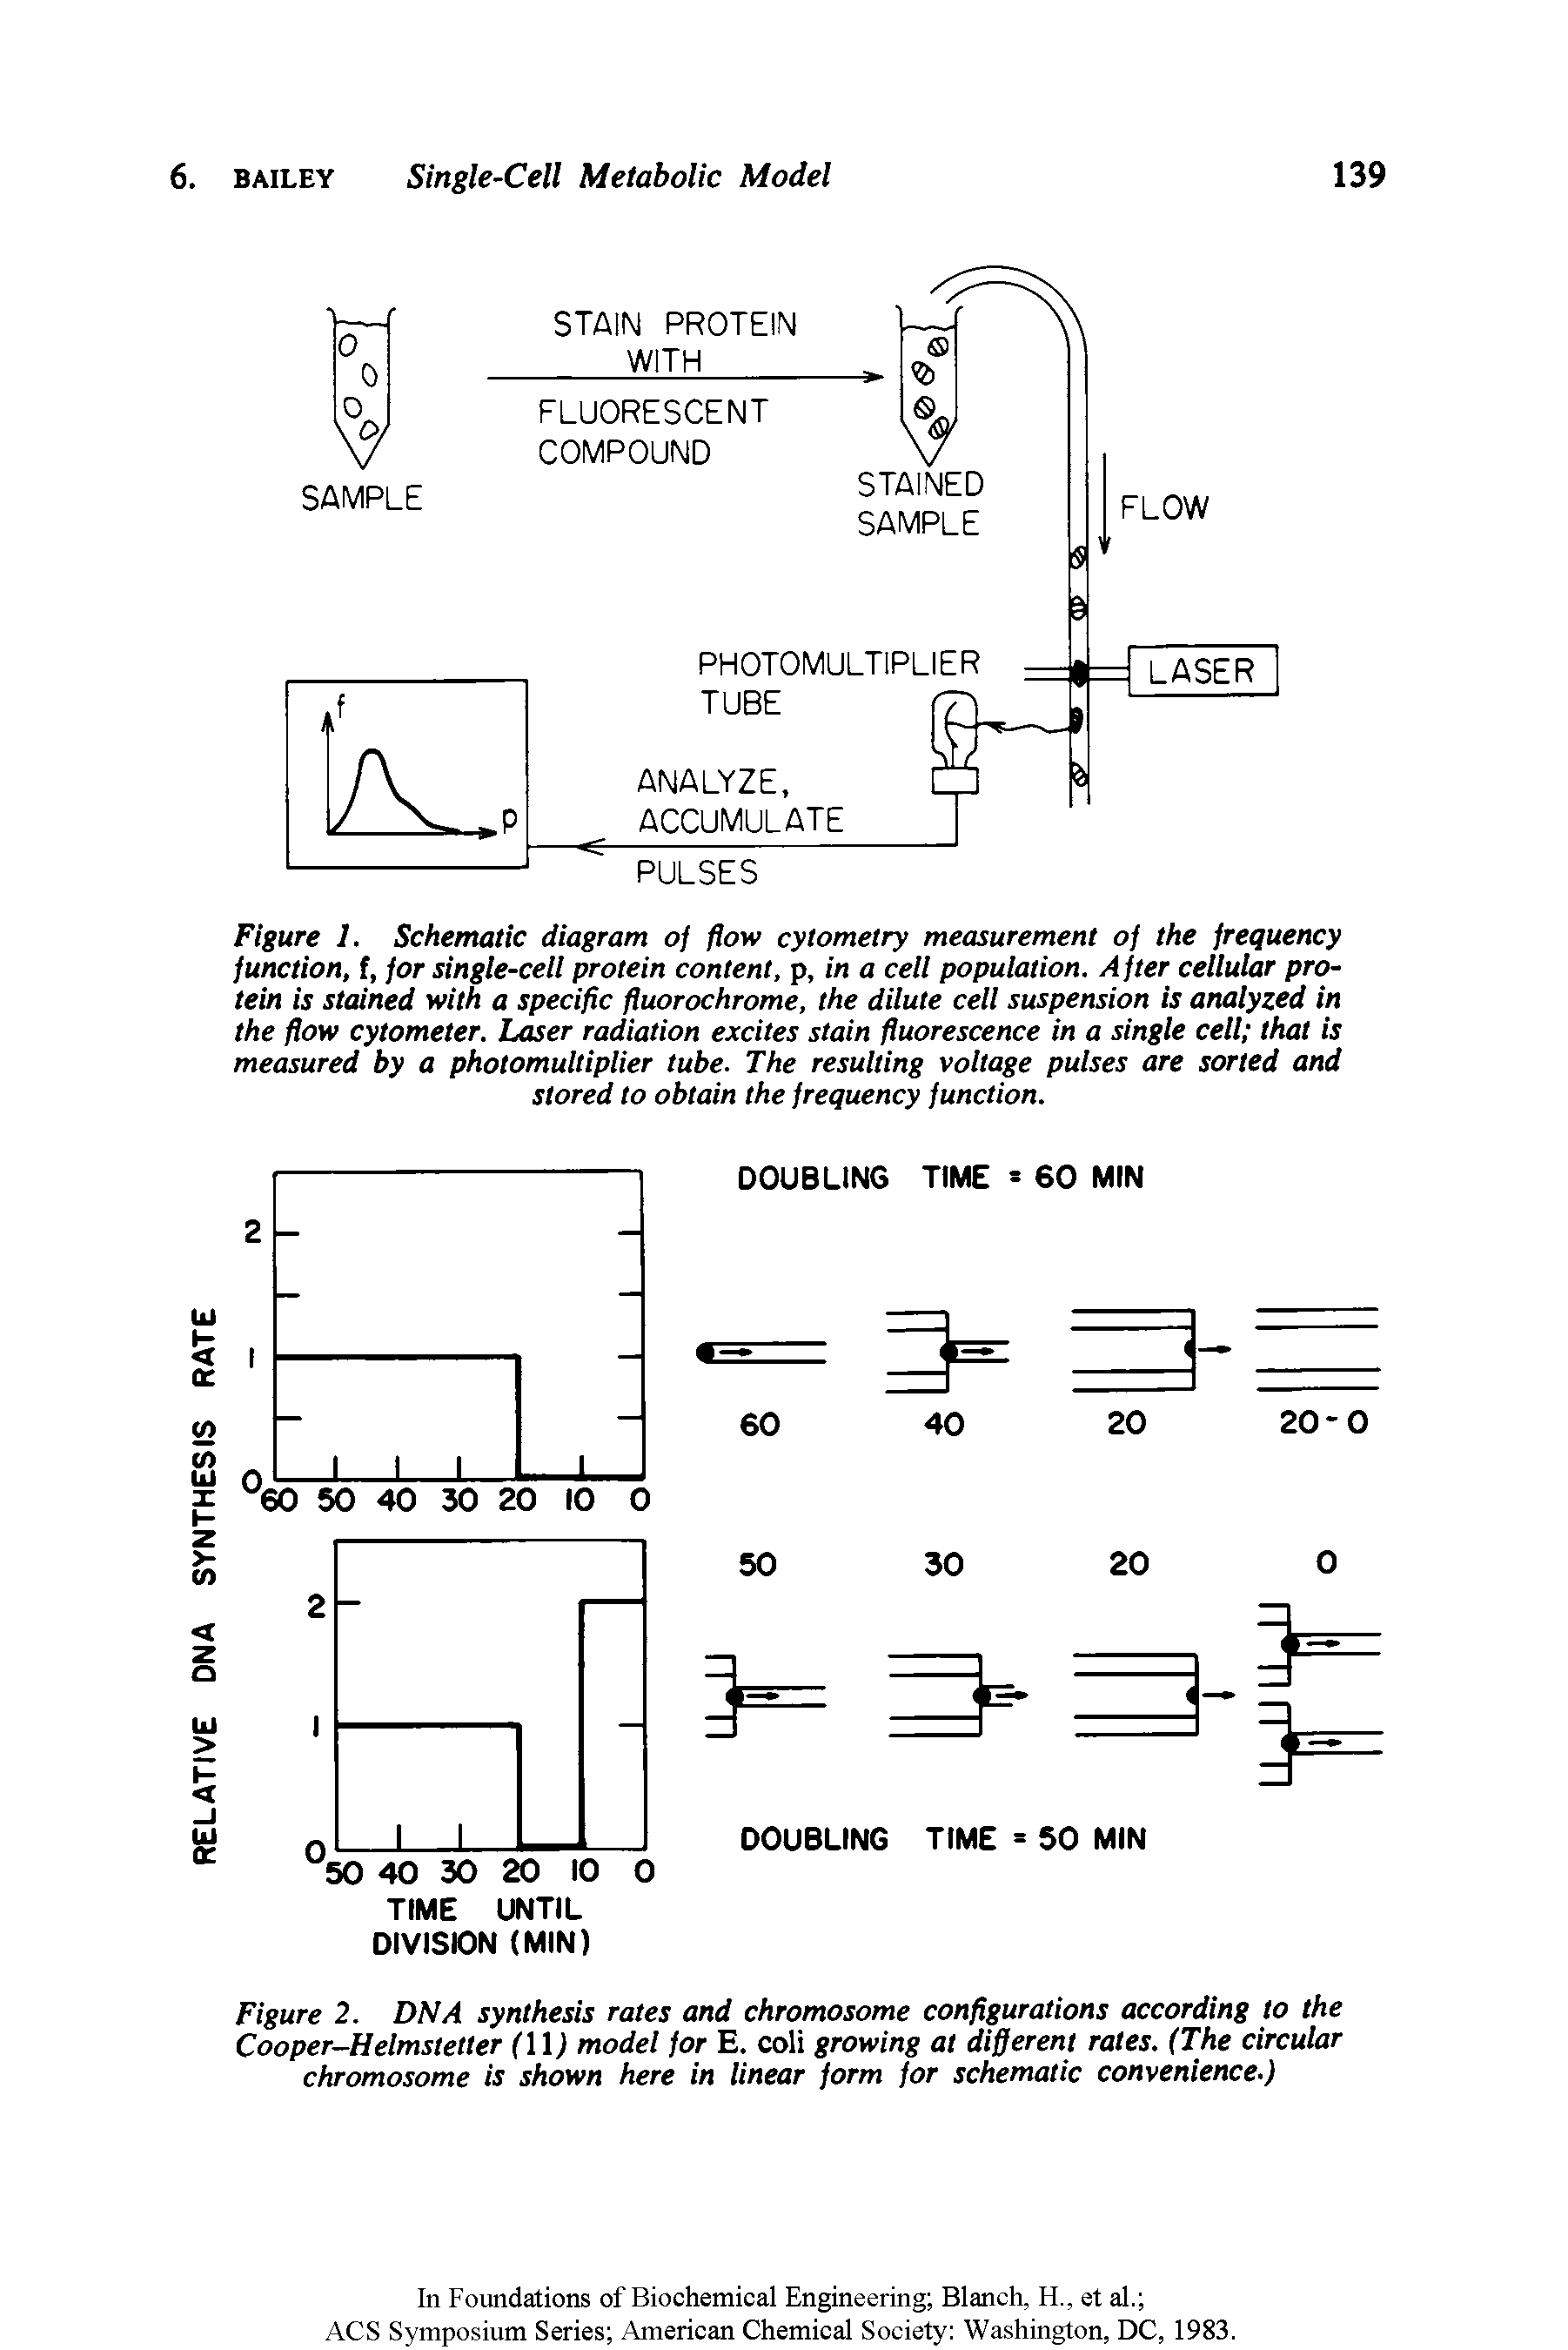 Figure 1. Schematic diagram of flow cytometry measurement of the frequency function, f, for single-cell protein content, p, in a cell population. After cellular protein is stained with a specific fluorochrome, the dilute cell suspension is analyzed in the flow cytometer. Laser radiation excites stain fluorescence in a single cell that is measured by a photomultiplier tube. The resulting voltage pulses are sorted and stored to obtain the frequency function.